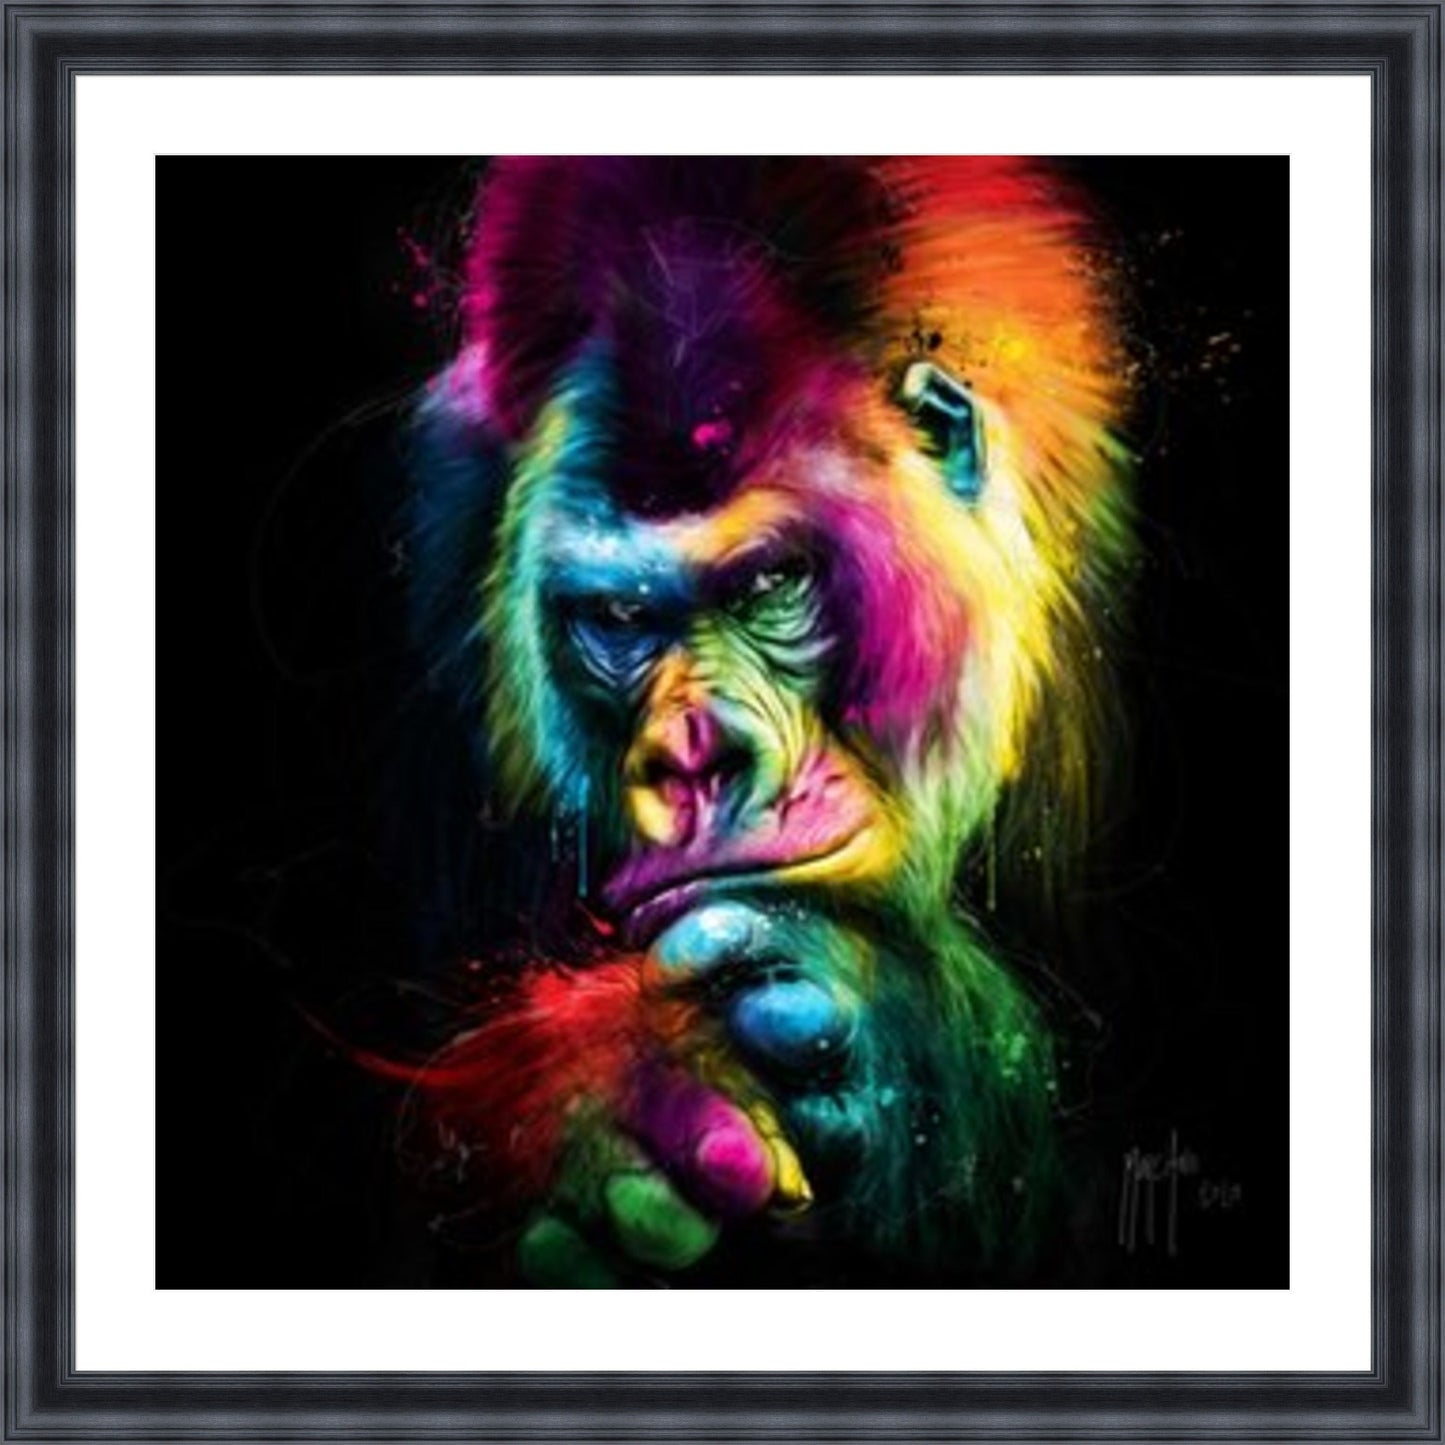 Le Vieux Sage - The Old Wise by Patrice Murciano